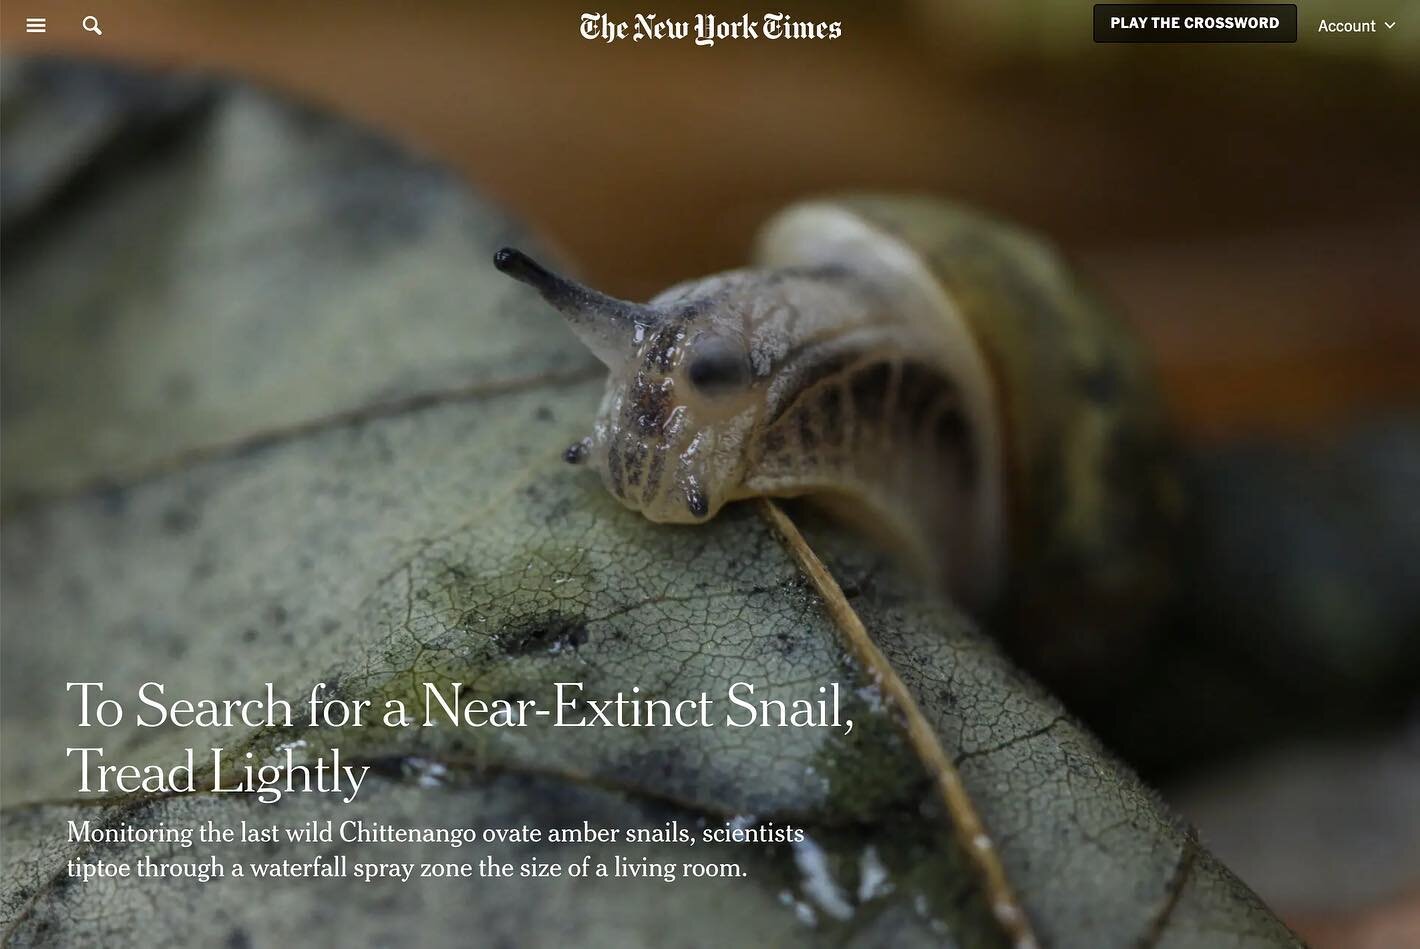 &ldquo;To Search for a Near-Extinct Snail, Tread Lightly: Monitoring the last wild Chittenango ovate amber snails, scientists tiptoe through a waterfall spray zone the size of a living room.&rdquo; - with @nytimes, wonderful writing by Oliver Whang (